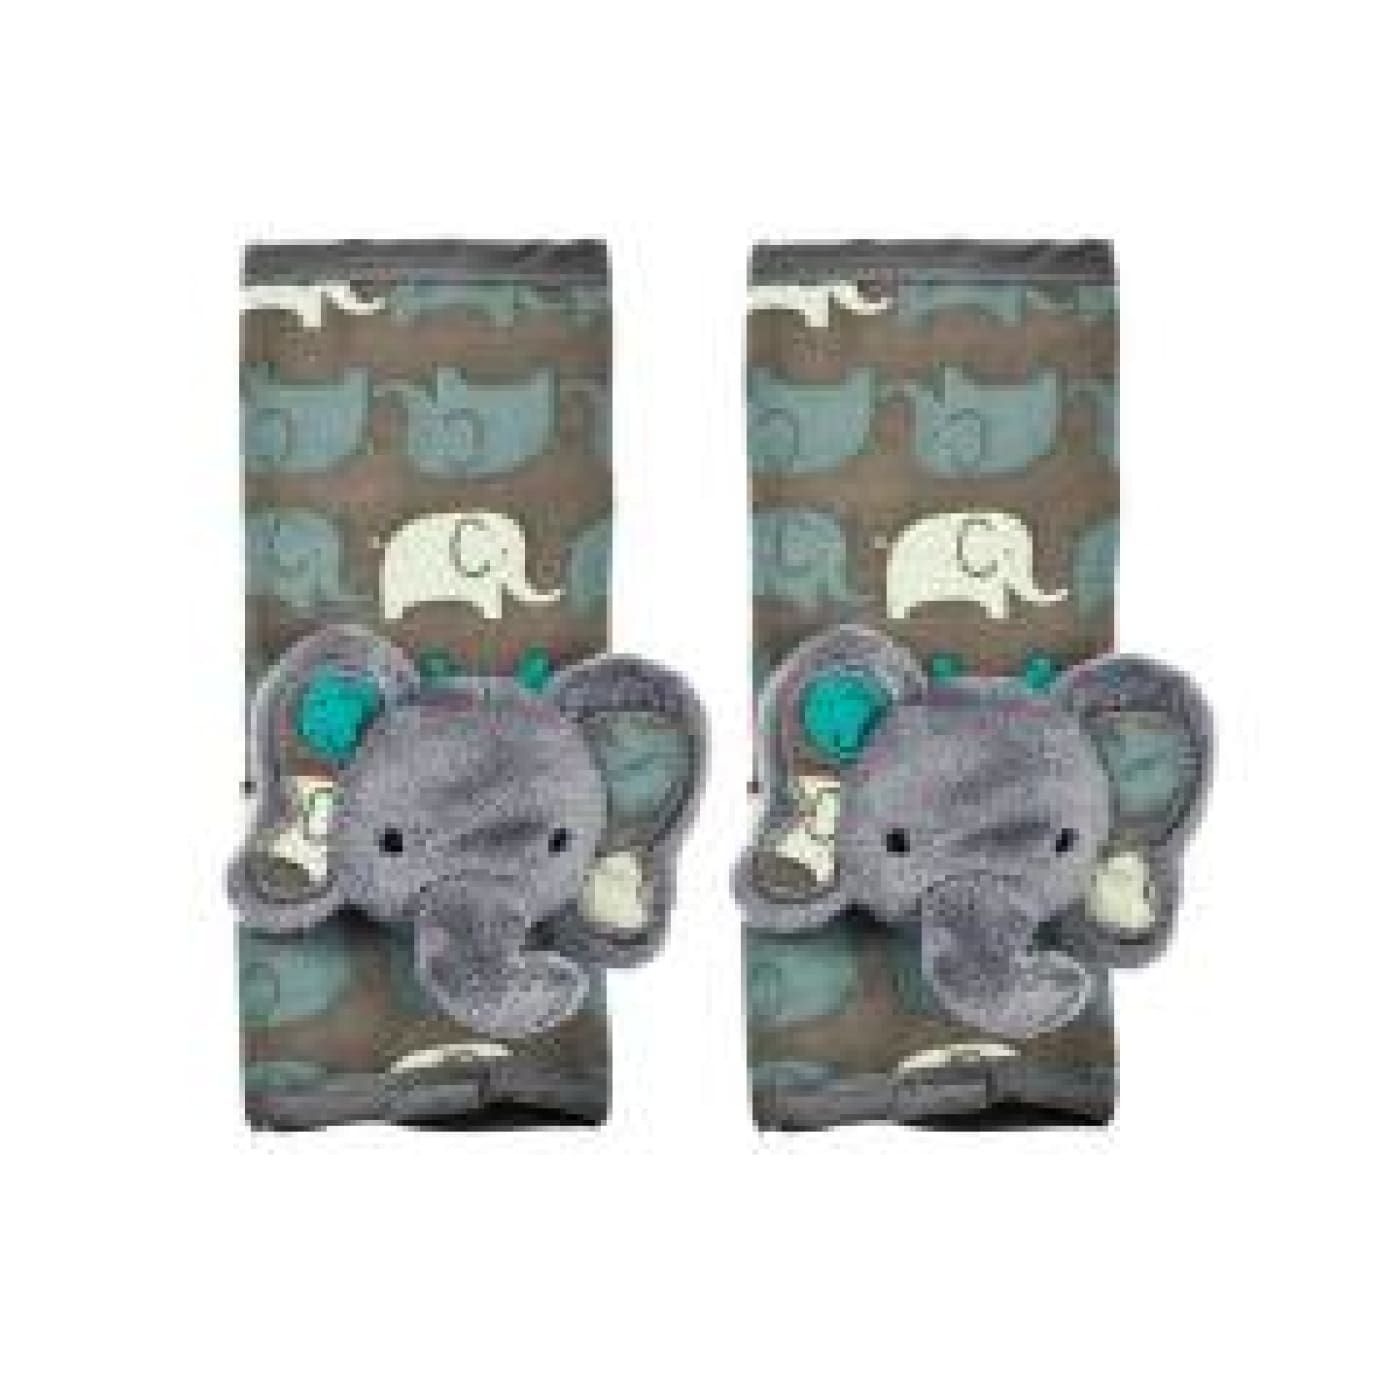 Playette Animal Strap Cover Pals - Elephants - CAR SEATS - HEAD SUPPORTS/HARNESS COVERS